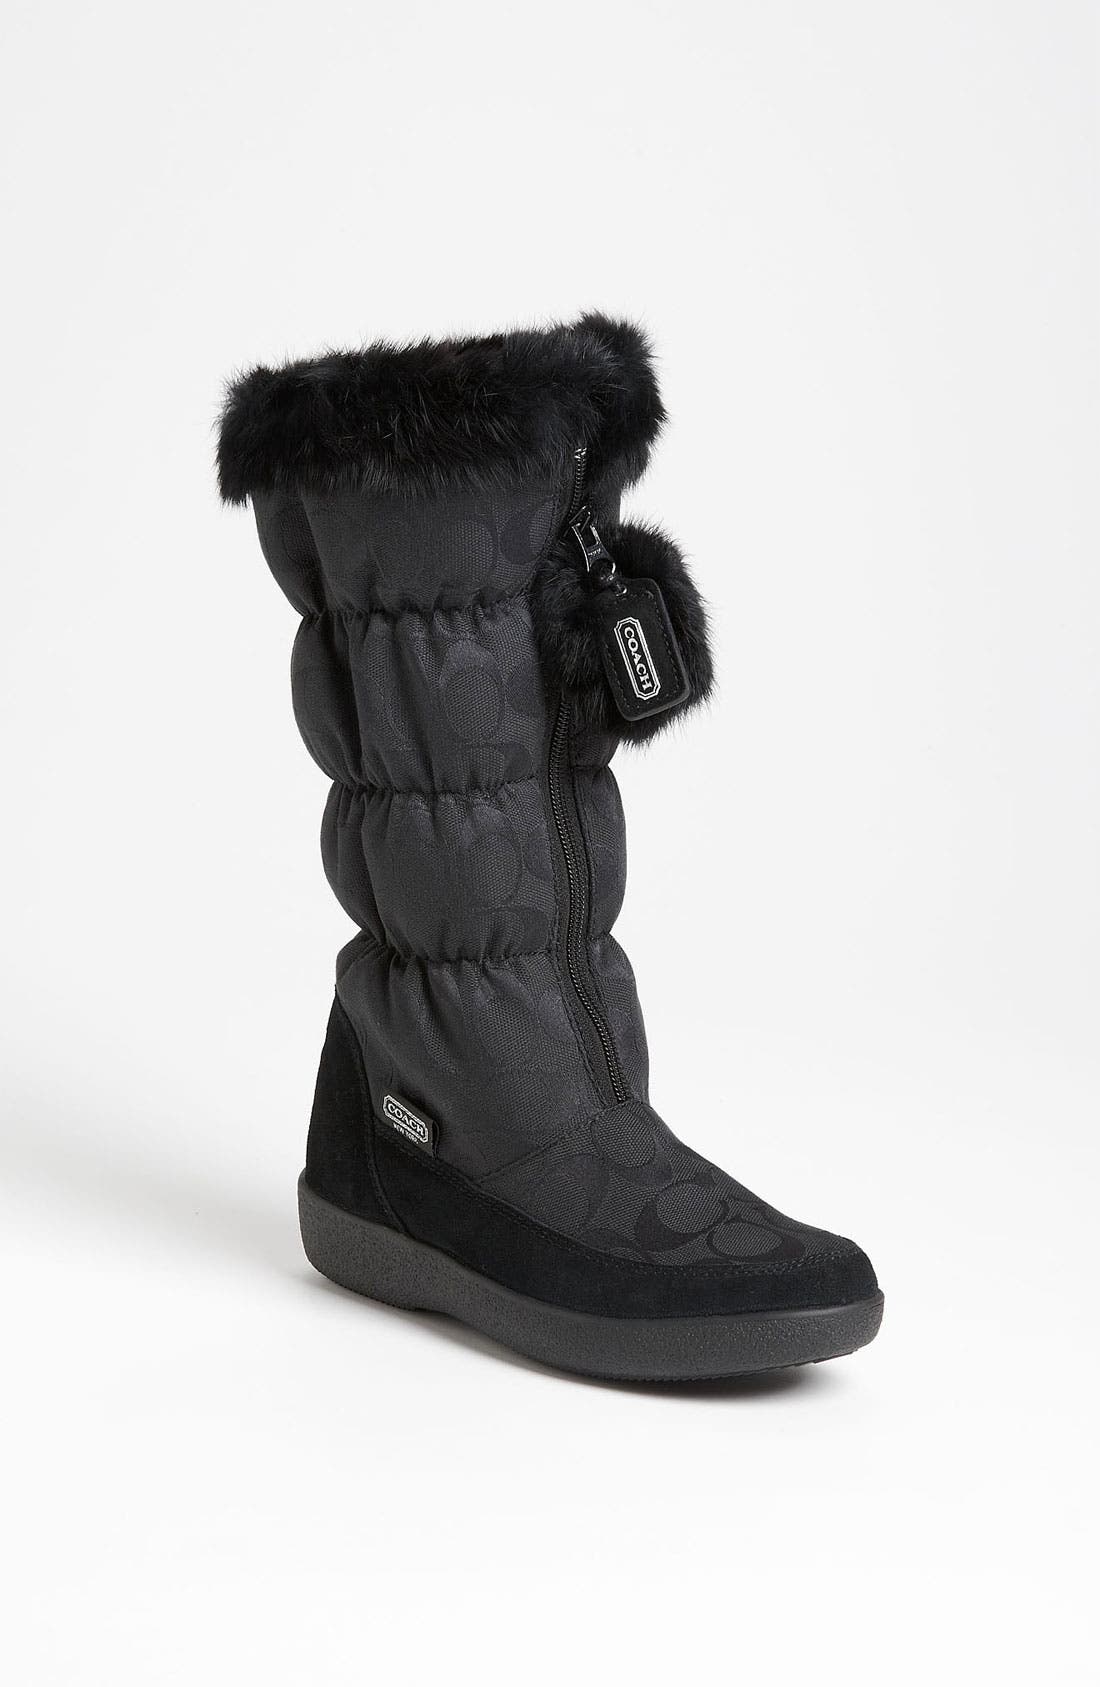 coach snow boots with rabbit fur